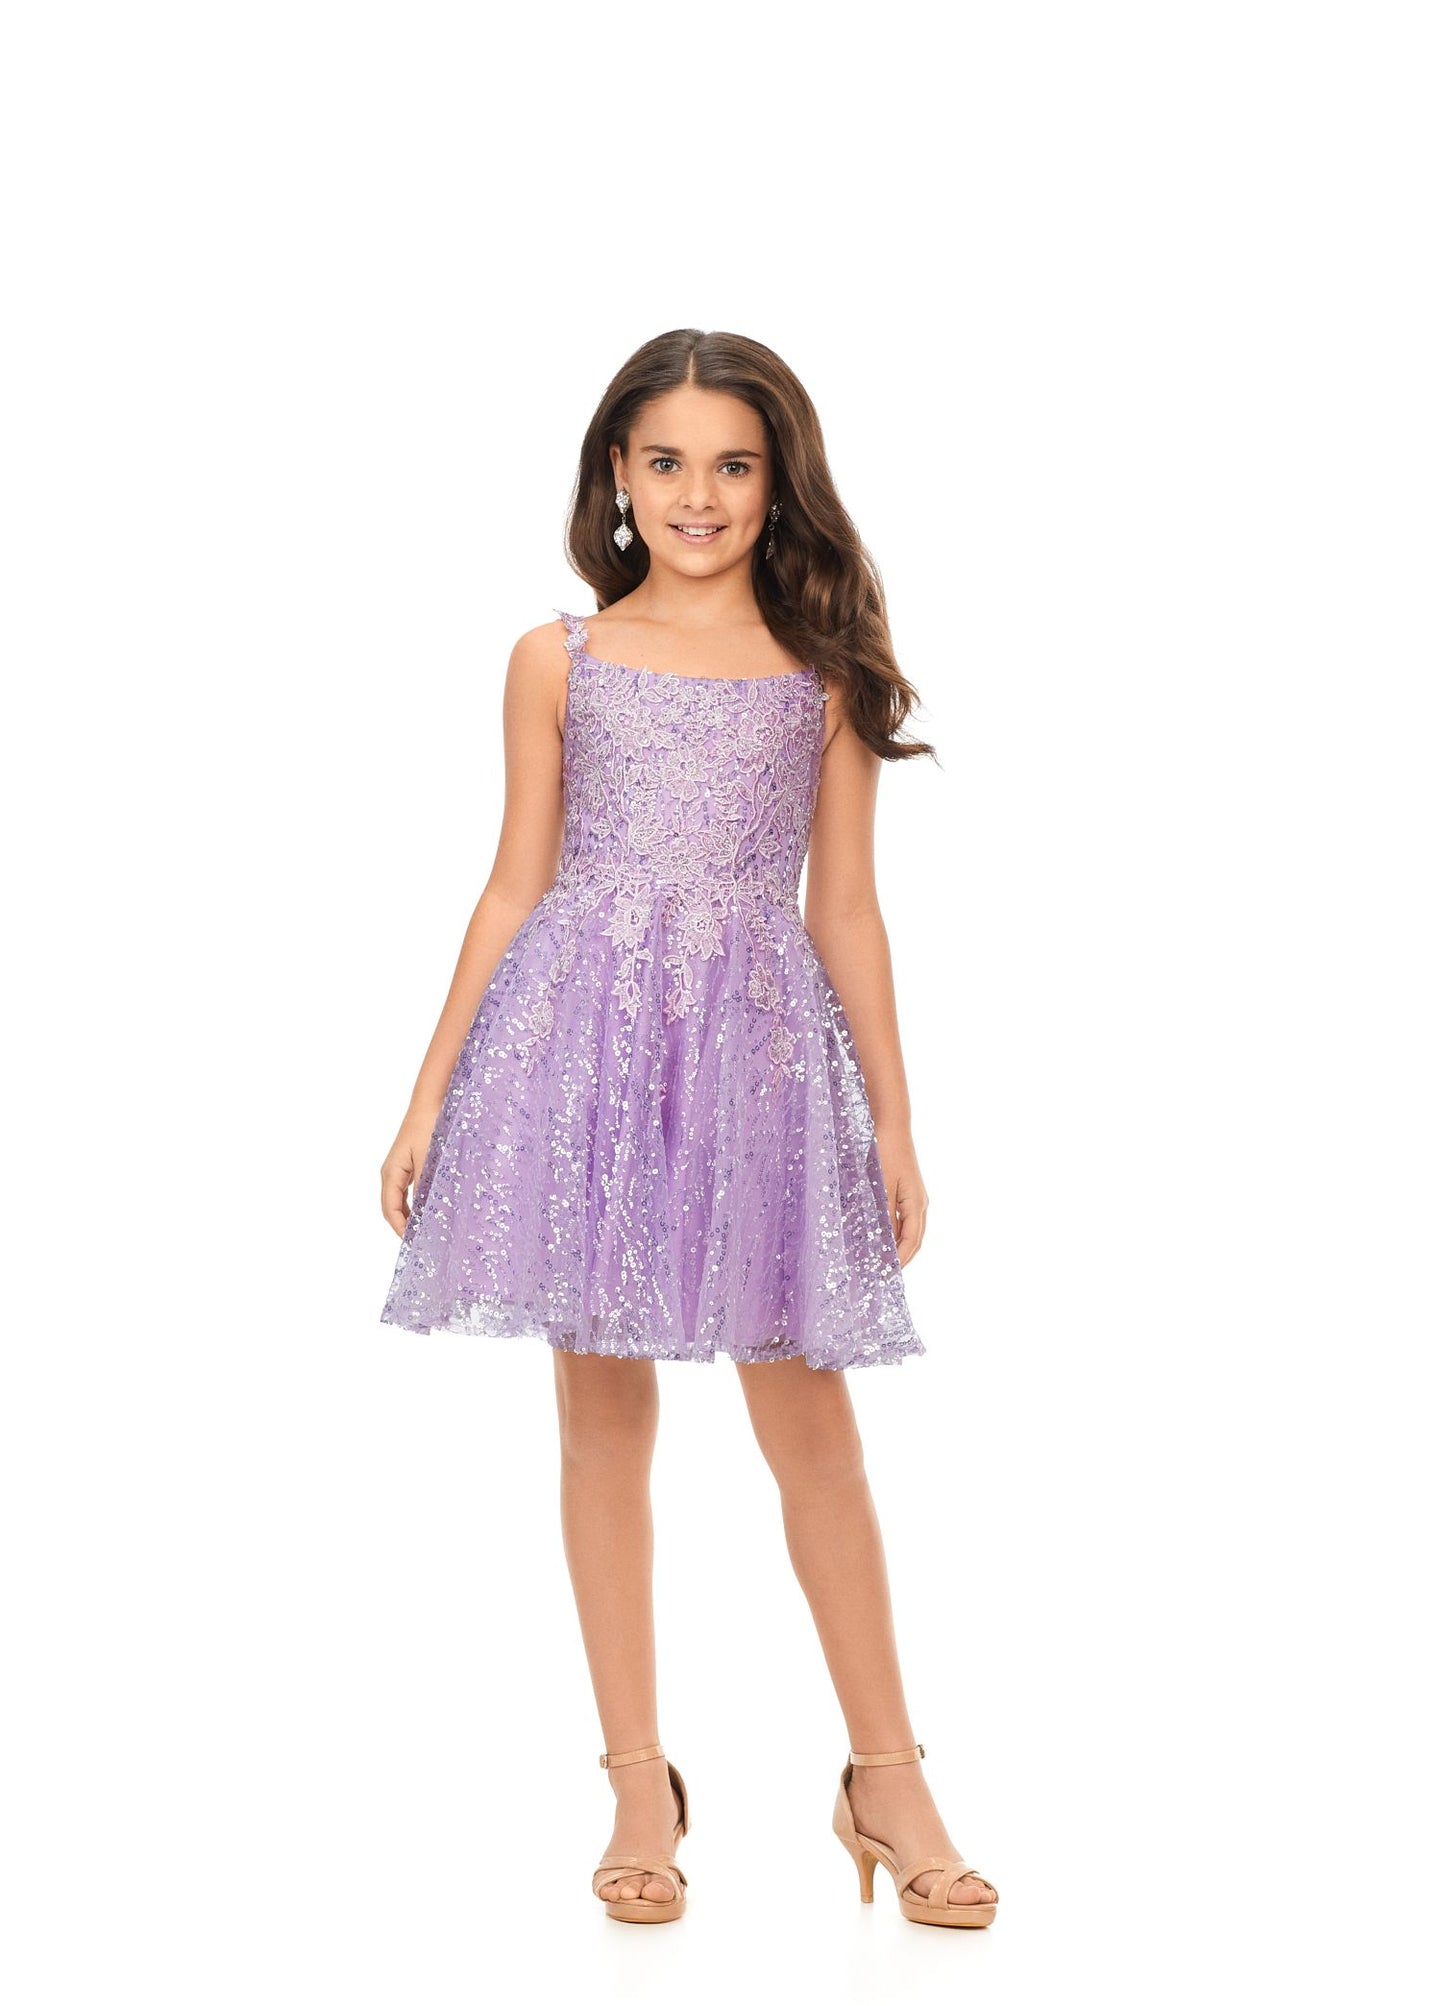 Ashley Lauren Kids 8161 The perfect kids cocktail dress is here. This fully embroidered sequin dress features a crew neckline and an a-line cut. Crew Neckline Embroidery Sequins A-Line Colors:  Lilac, Sky